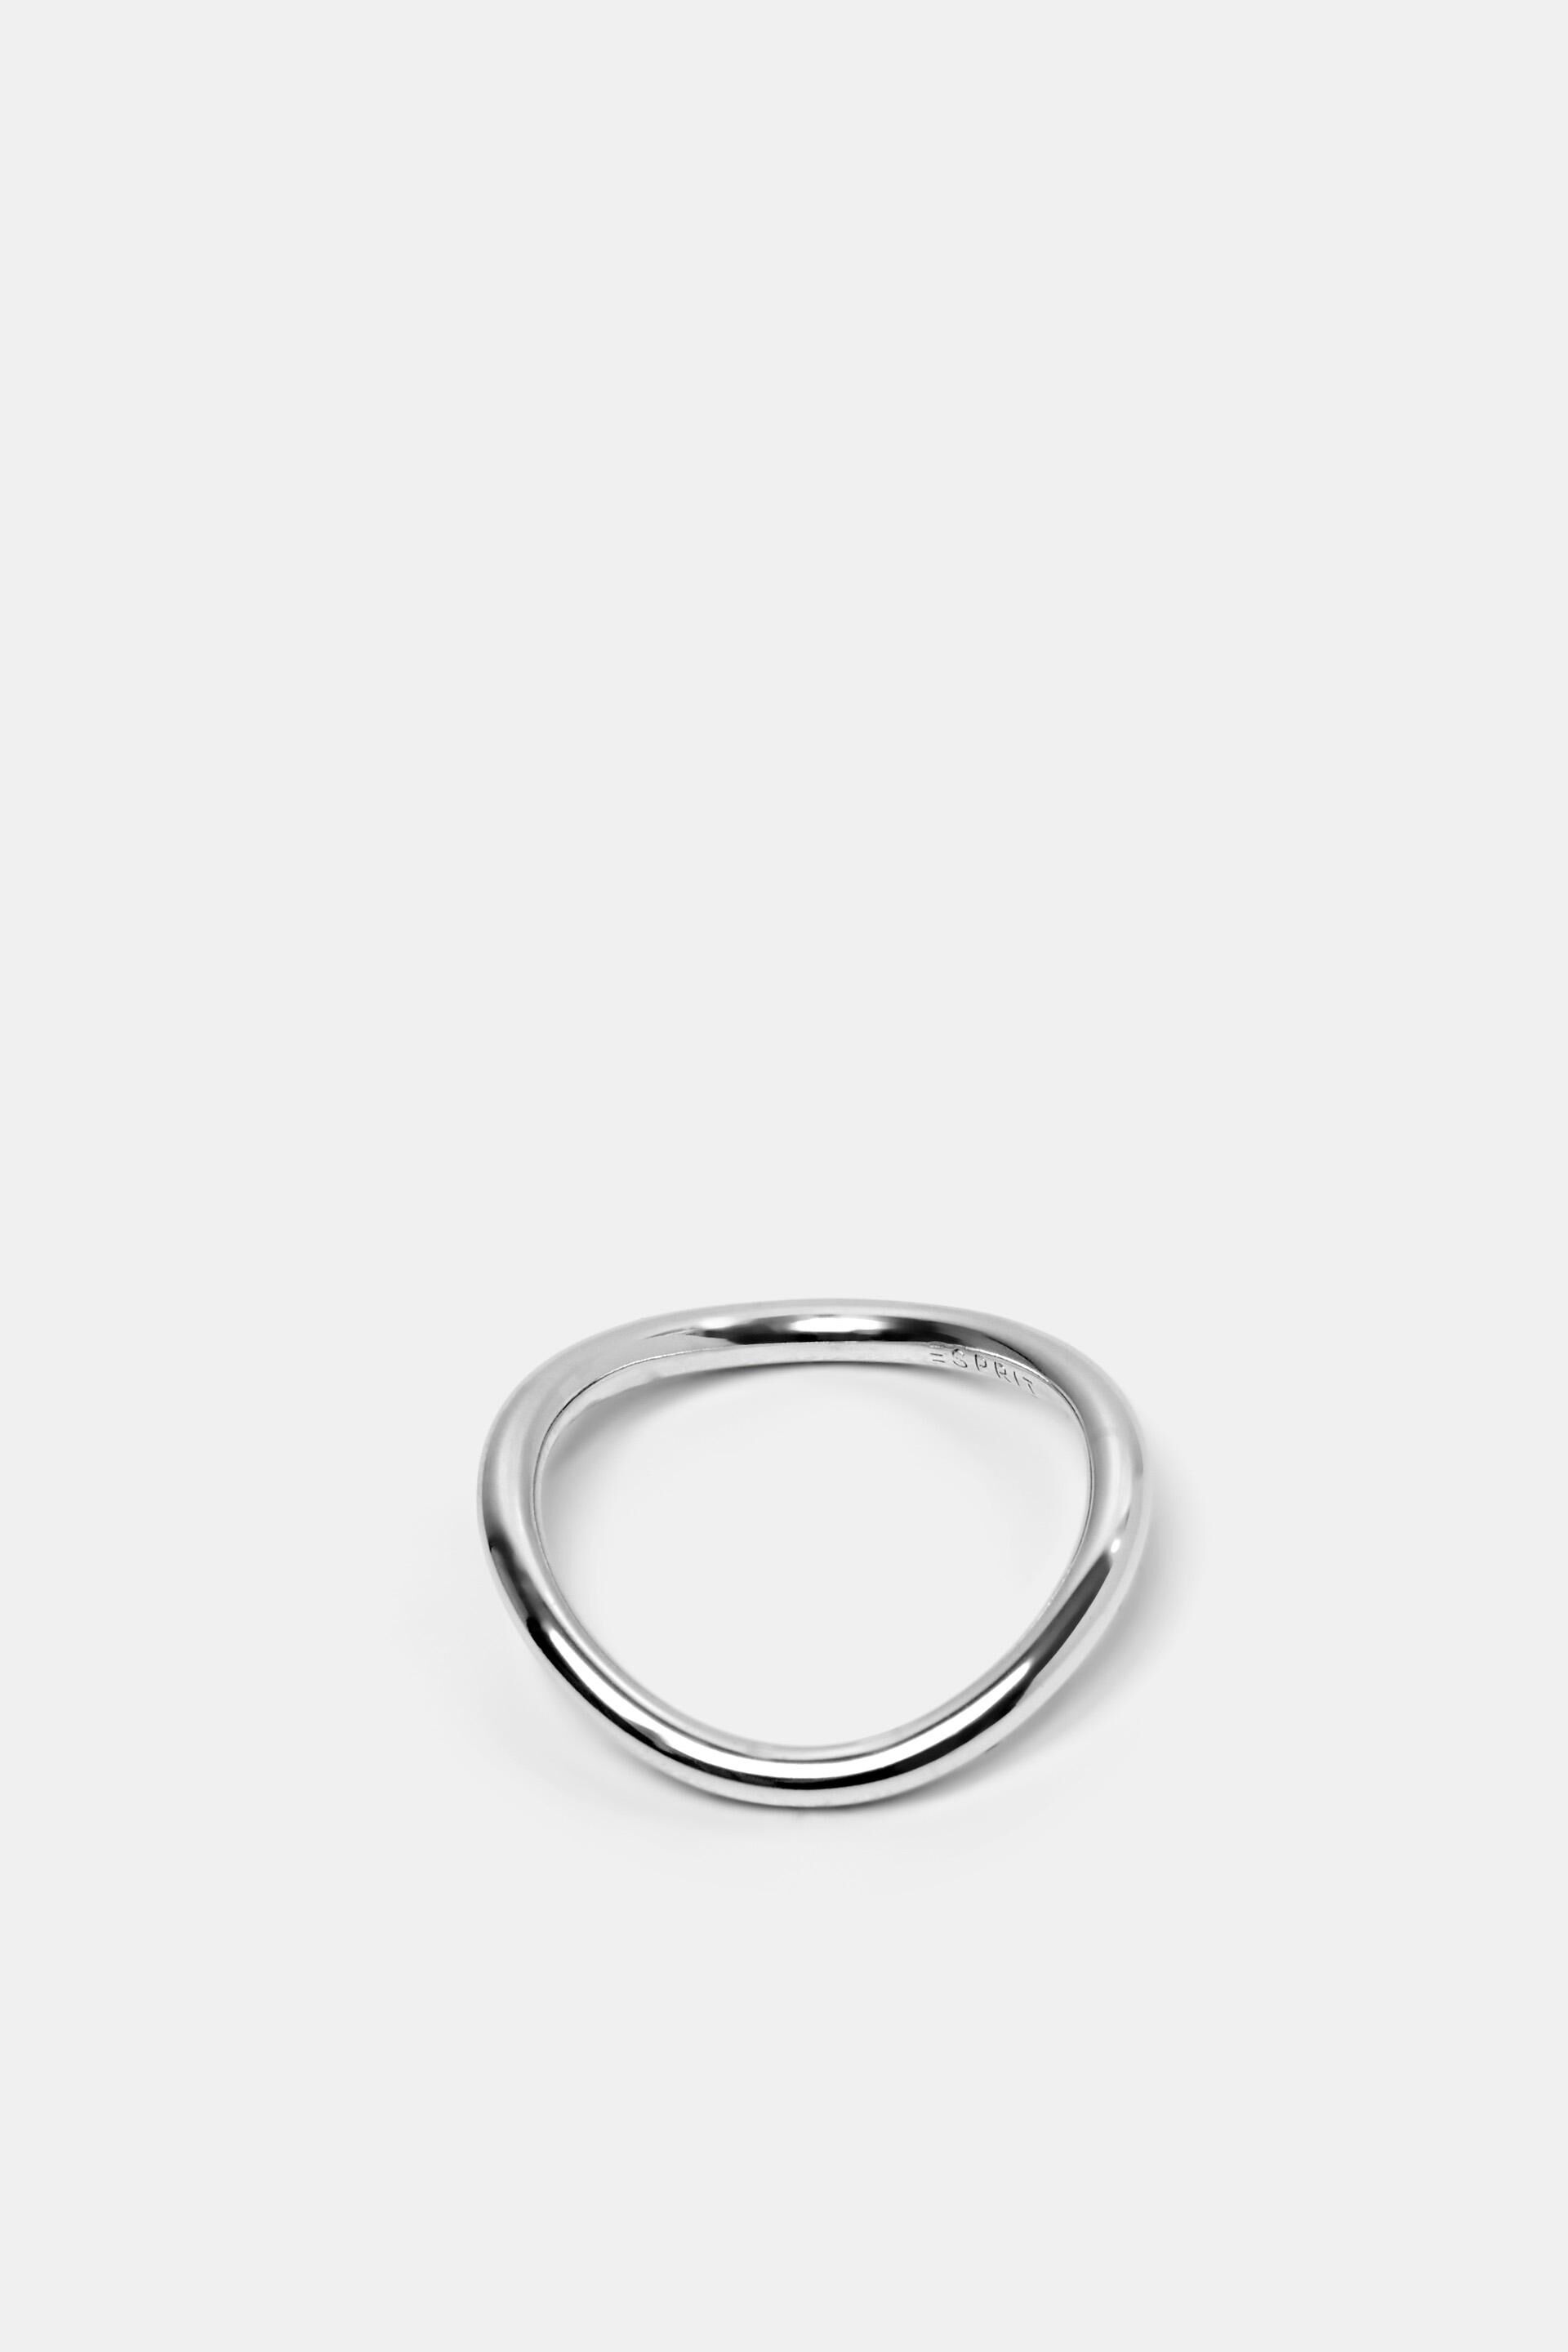 Esprit Wavy Silver Sterling Ring